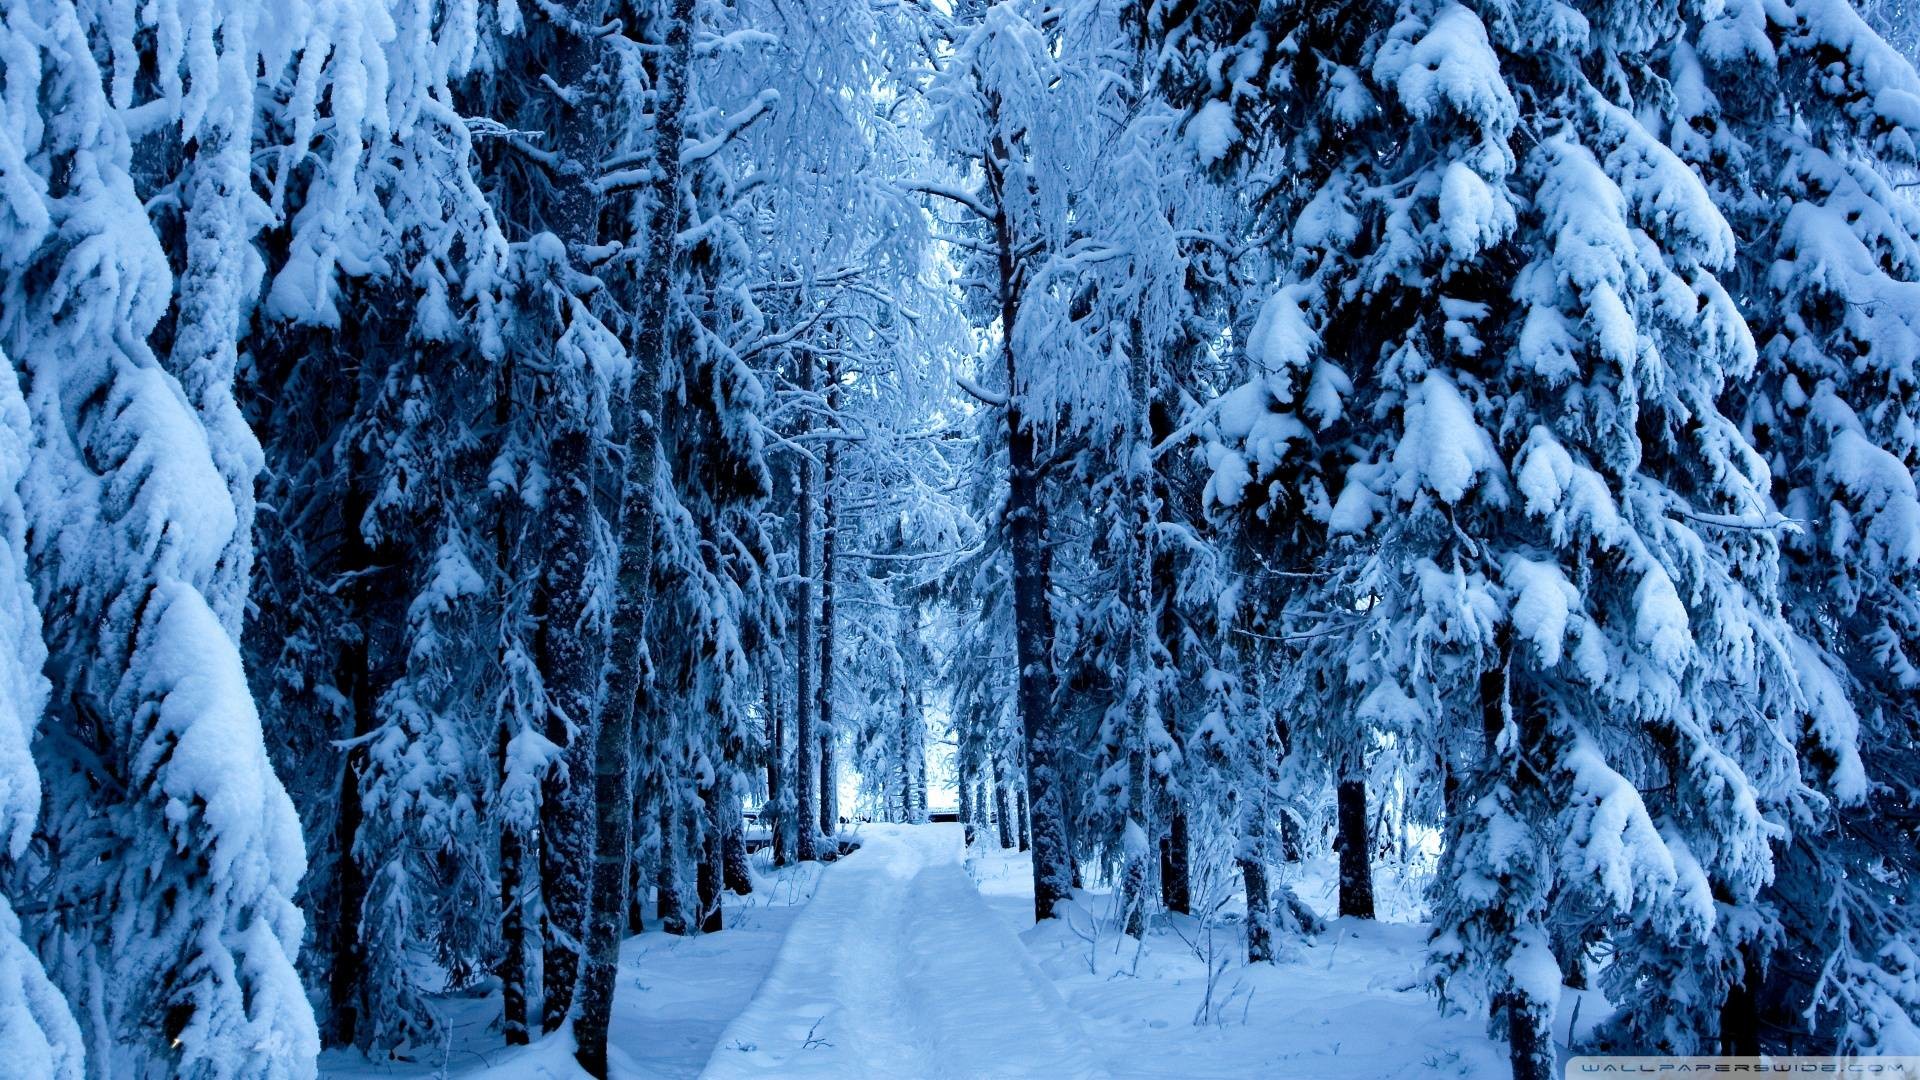 1920x1080 Snowy Forest Wallpaper | Wallpapers For Desktop | Pinterest | Forest  wallpaper, Wallpapers and Forests